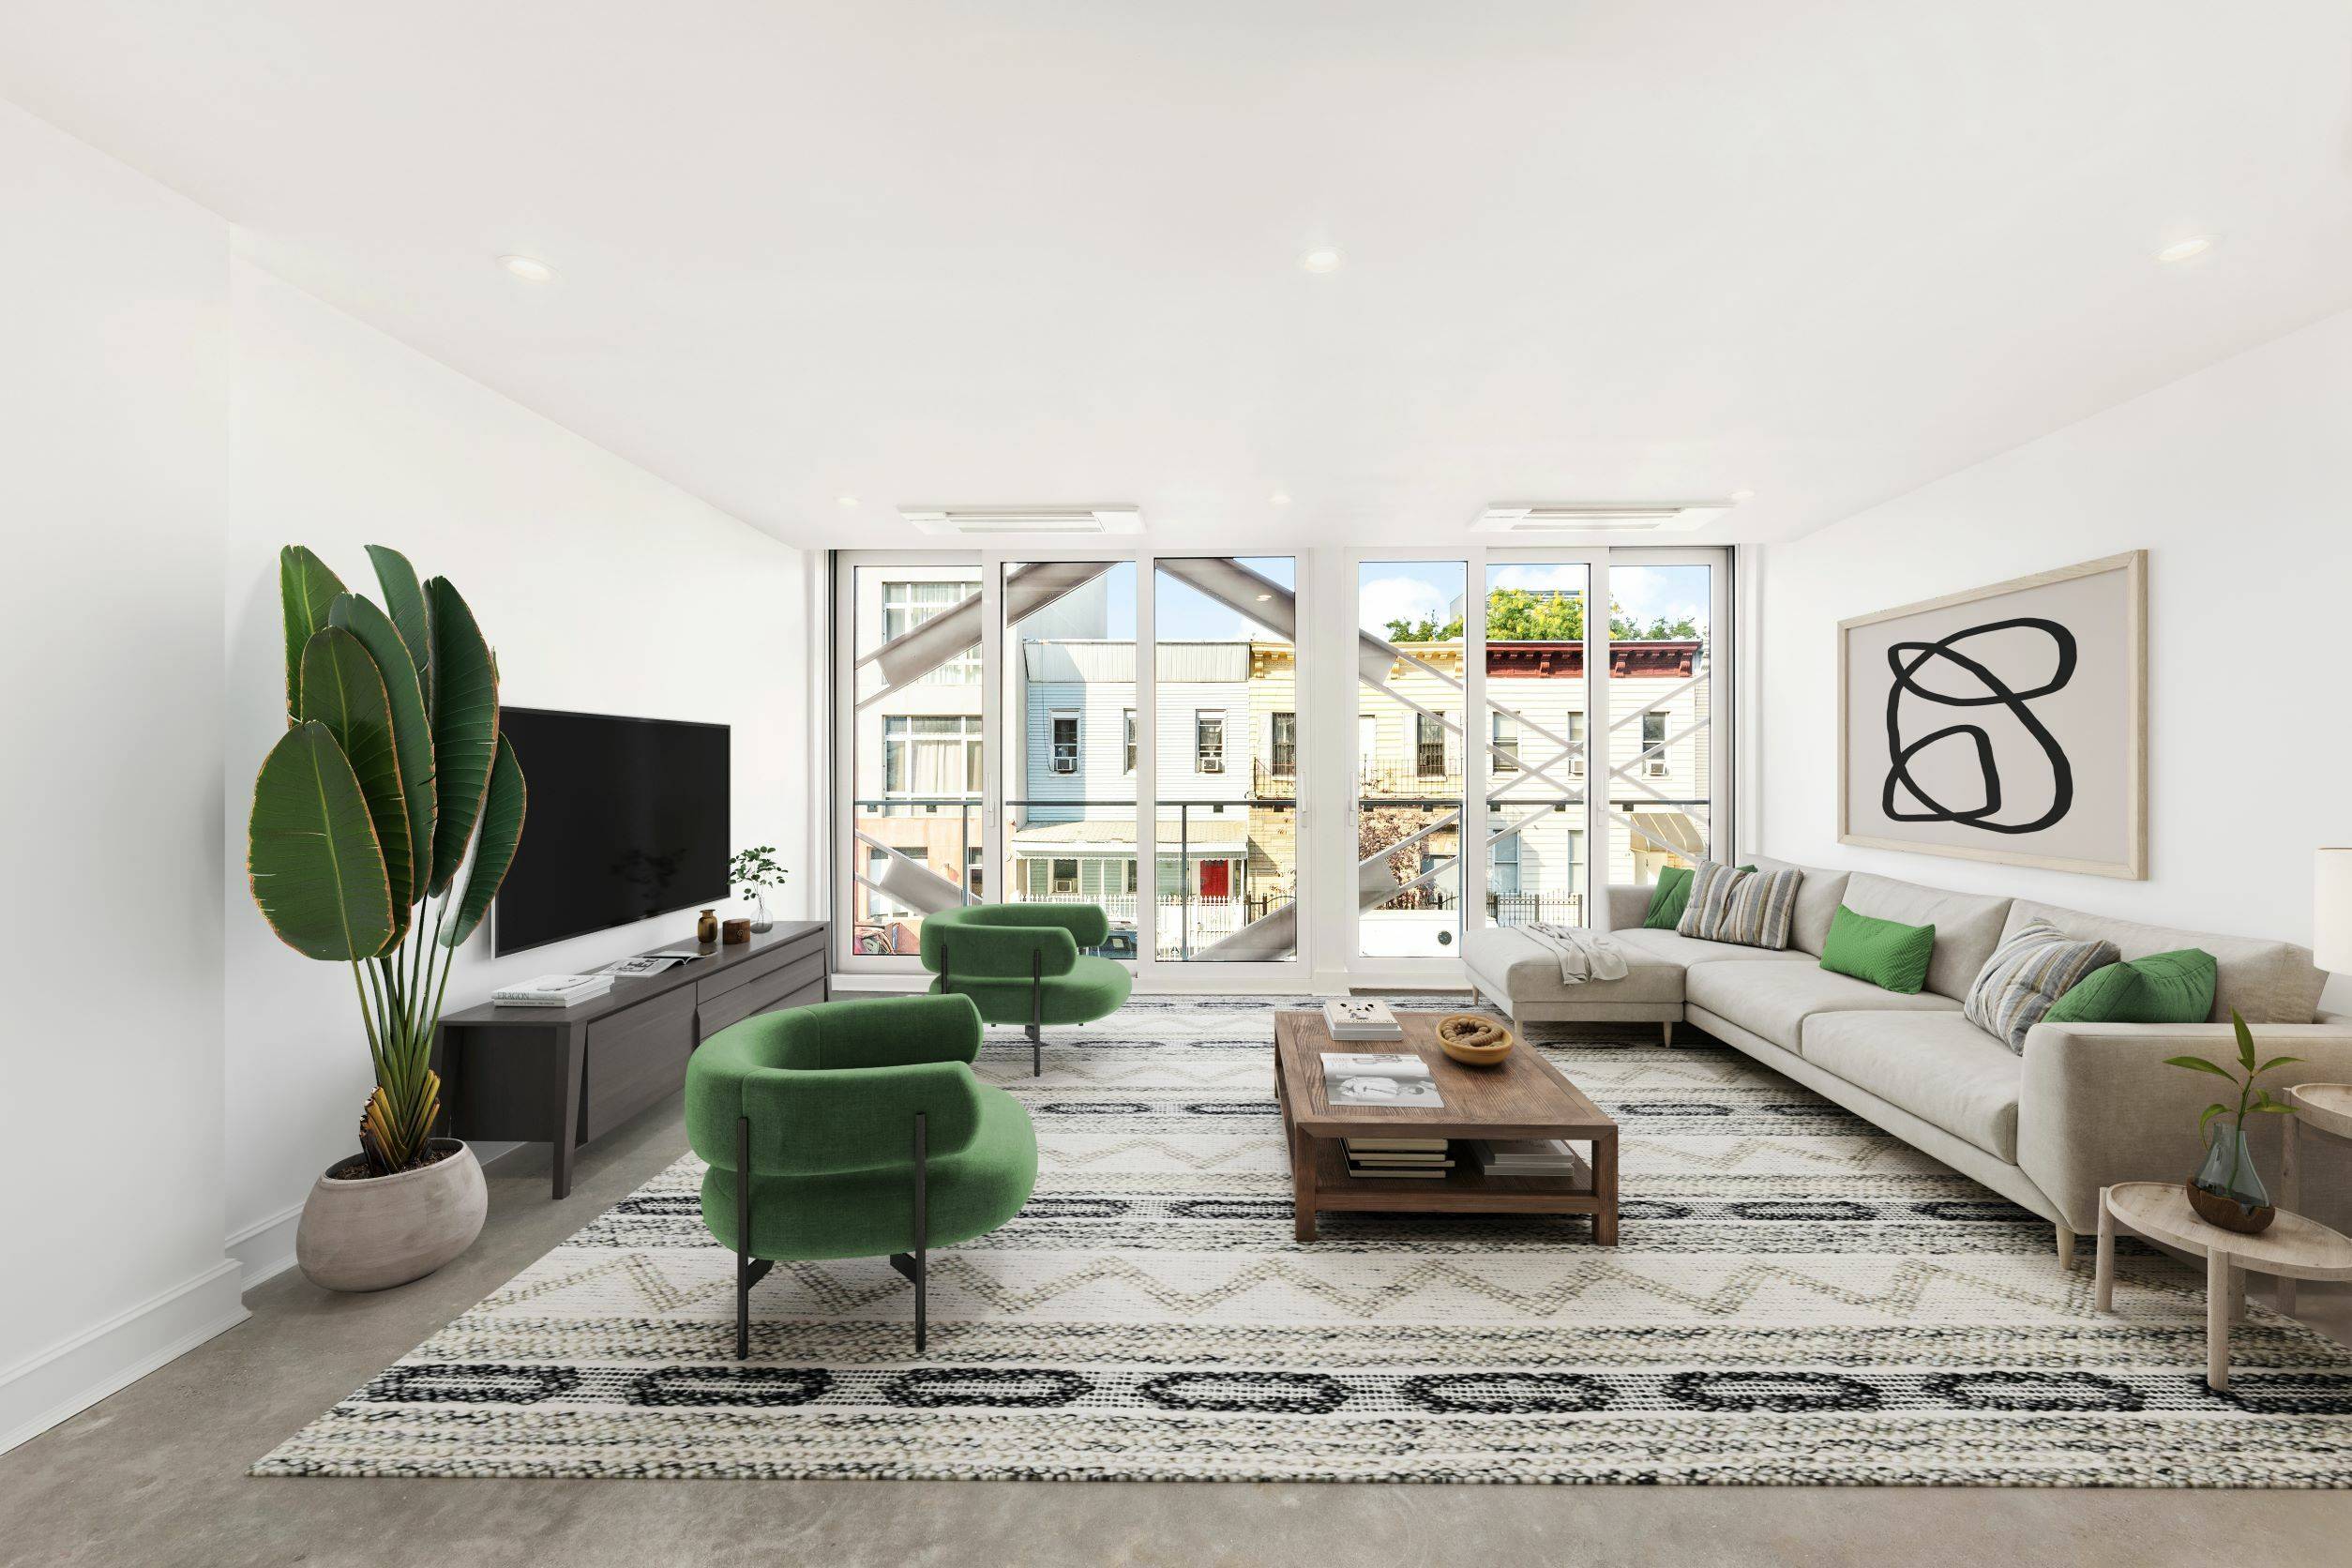 Introducing this brand new Bushwick condominium suffused with natural light, a chic convertible 3 bedroom, 2 bathroom floor through home graced with statement finishes that exude luxury and style.